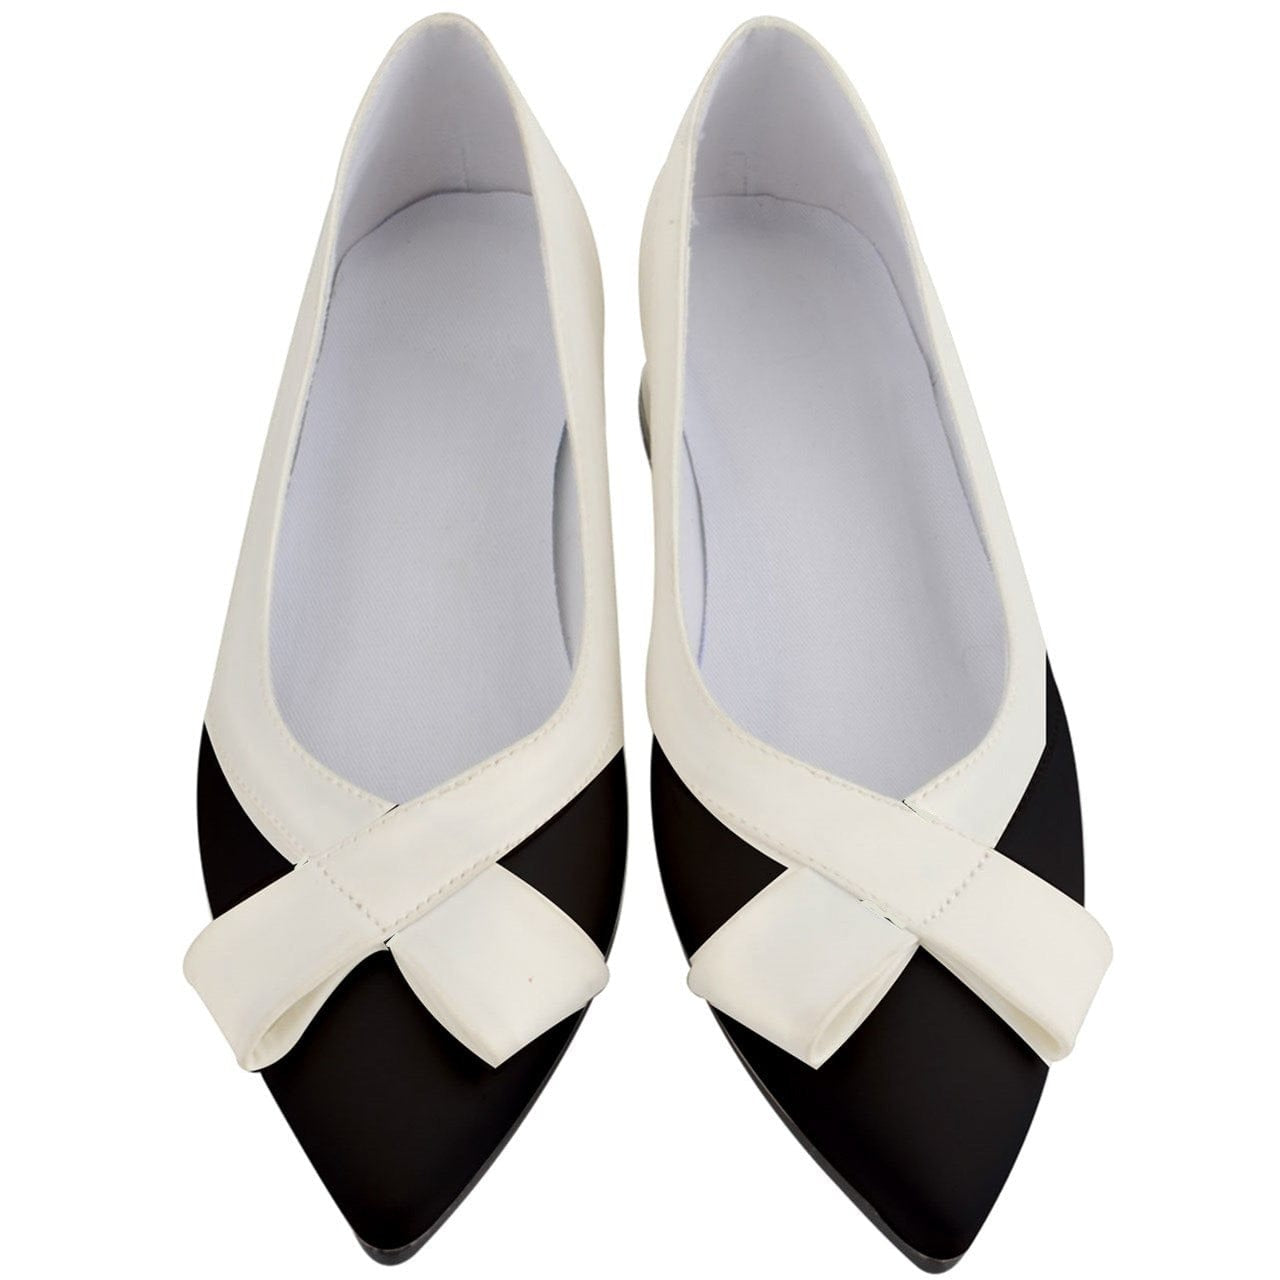 the-wheaten-store-women-s-bow-low-heels-pointed-ballerinas-black-and-white-heeled-sandals-33143234789573